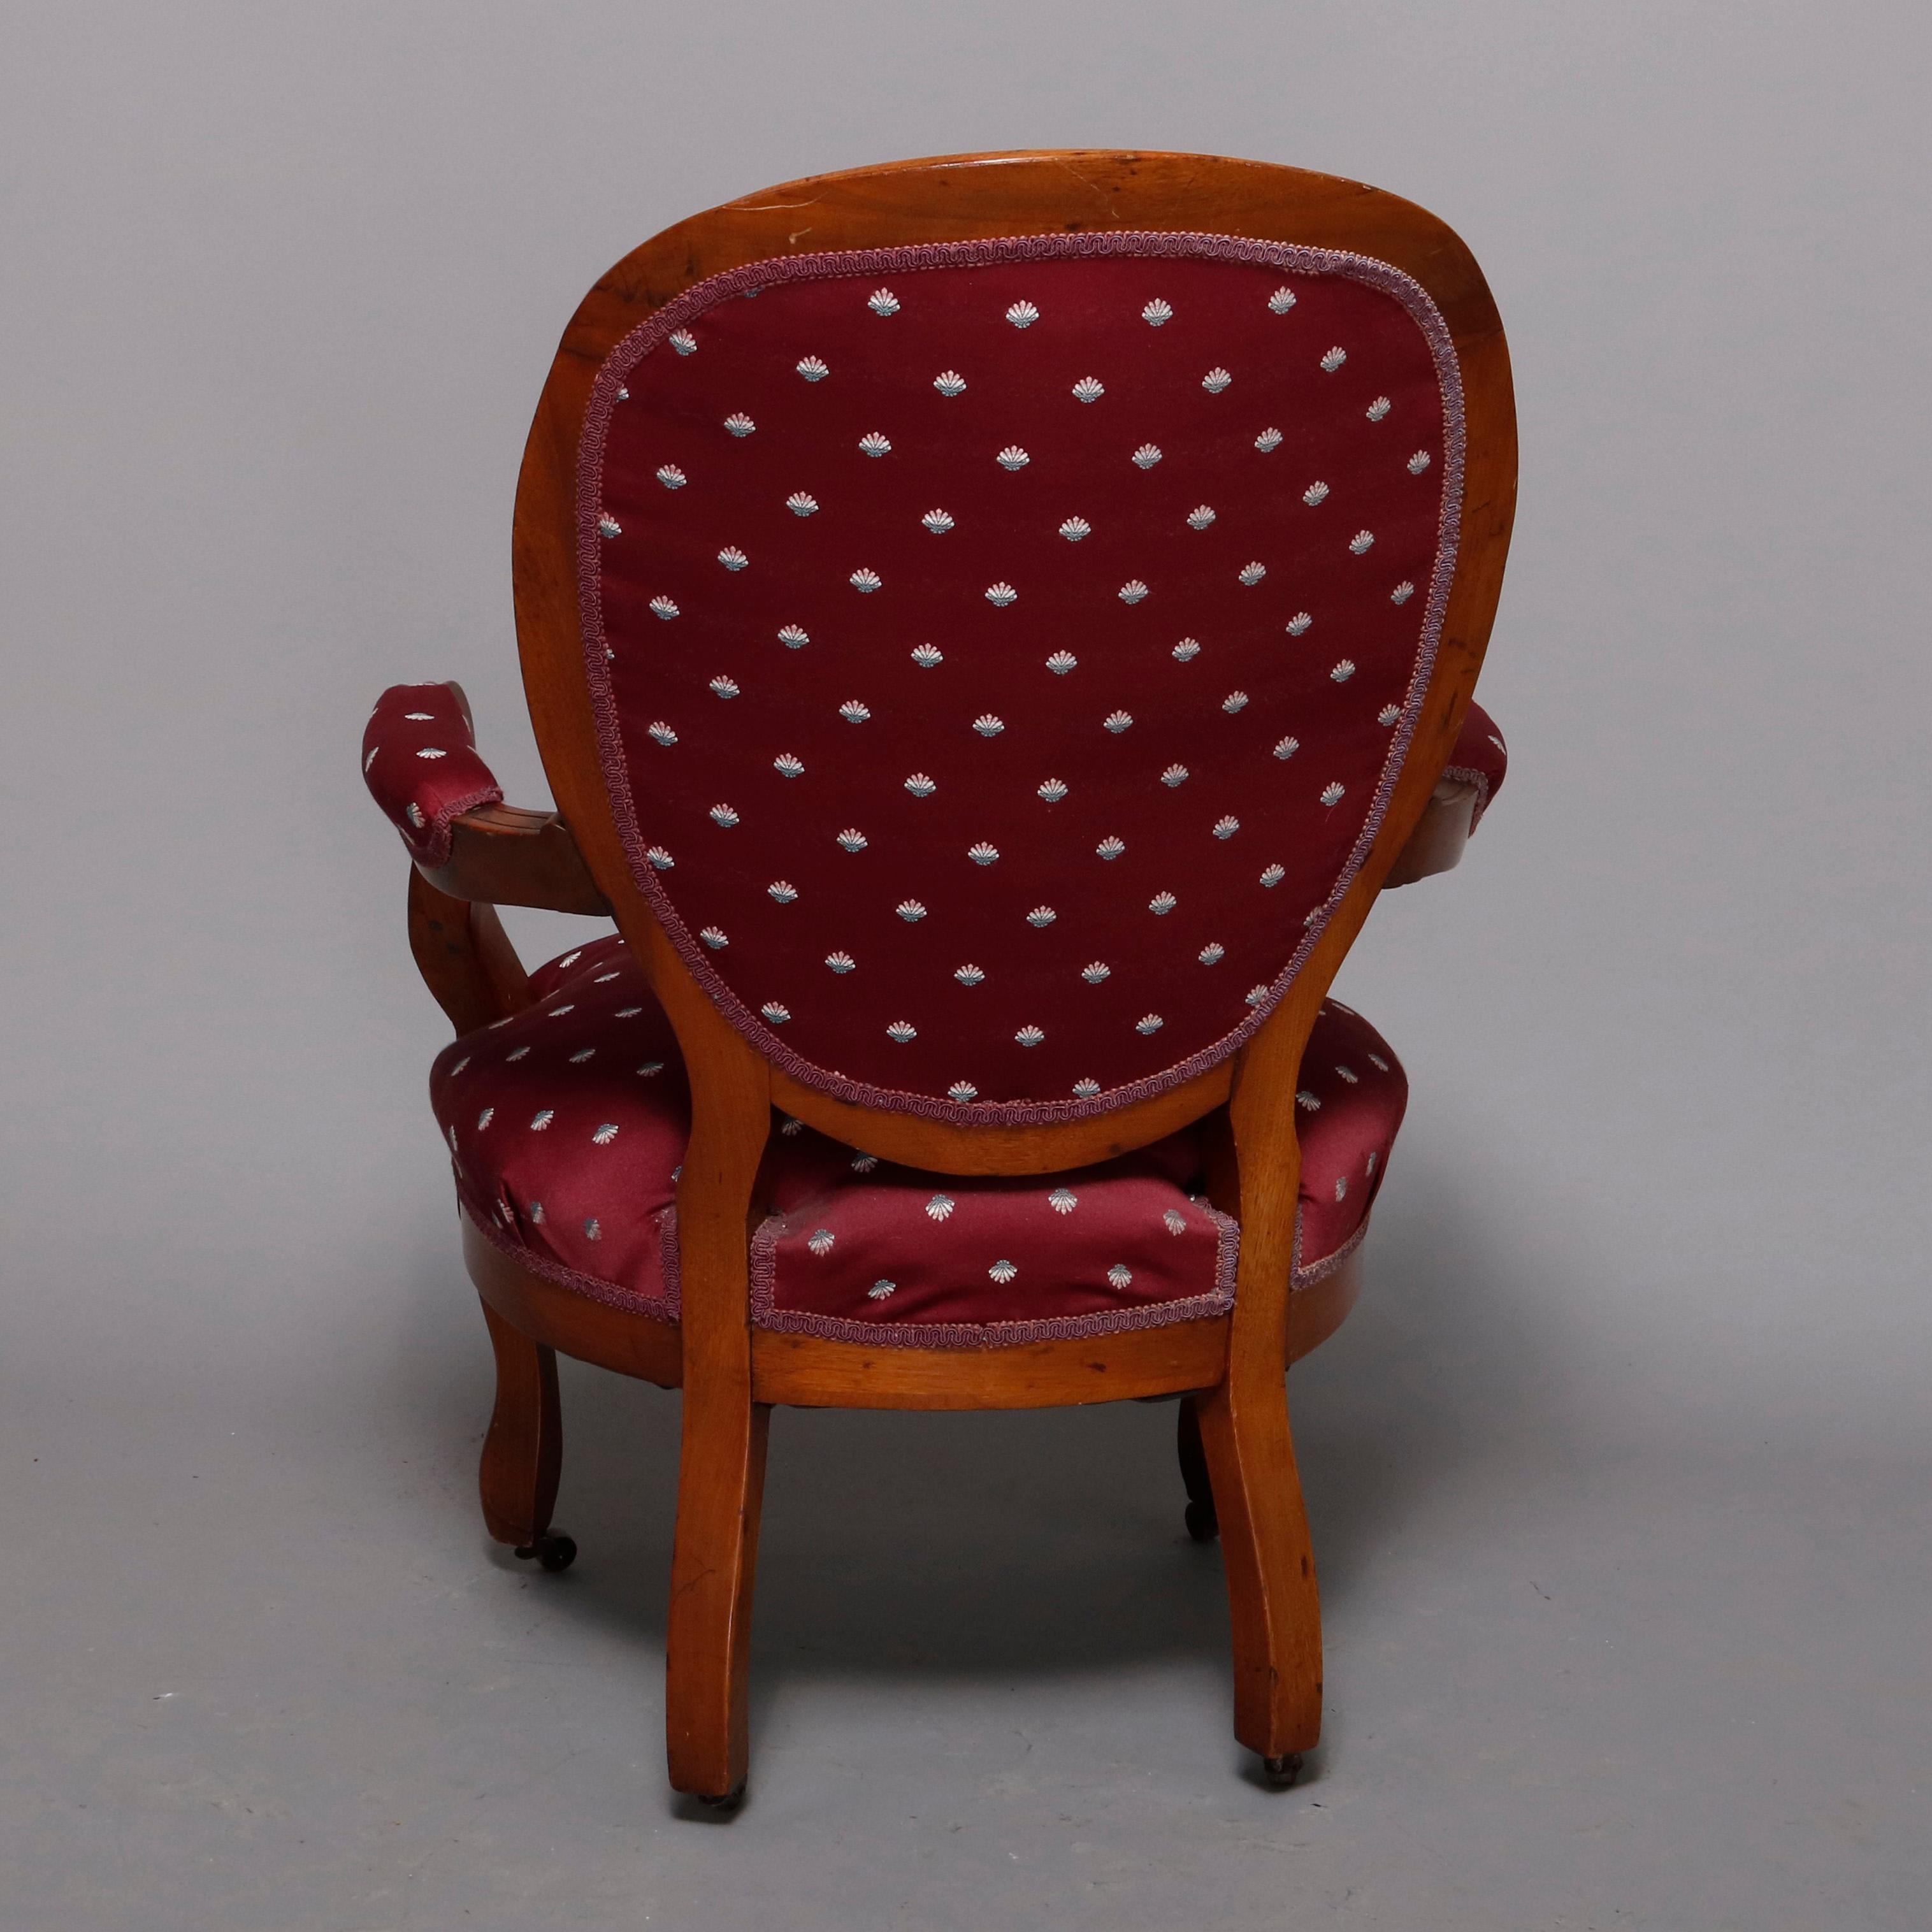 American Antique Victorian Upholstered Finger Carved Walnut Parlor Armchair, circa 1880